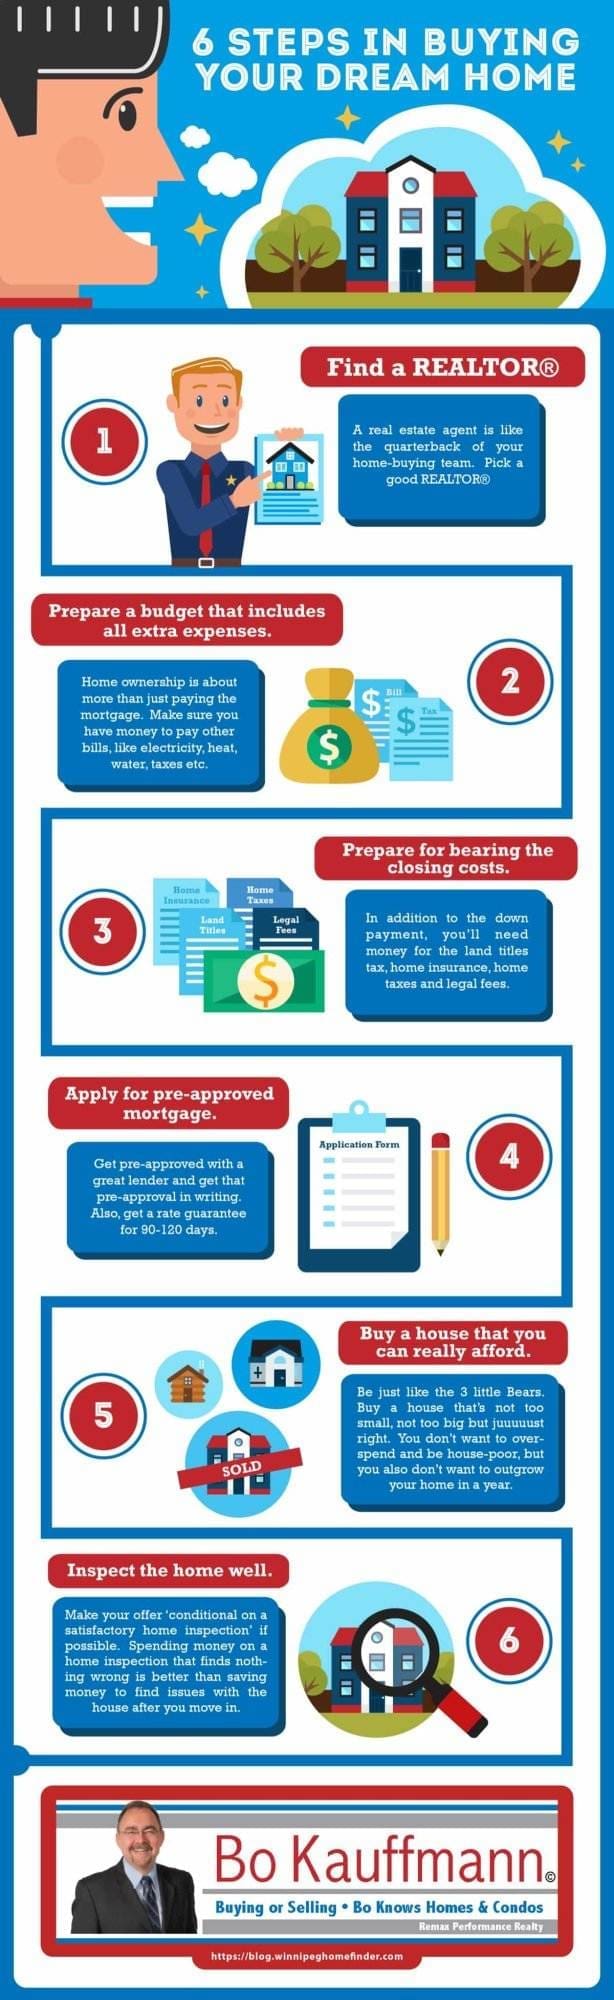 6 Steps to assure a successful home-buying journey (Infographic)